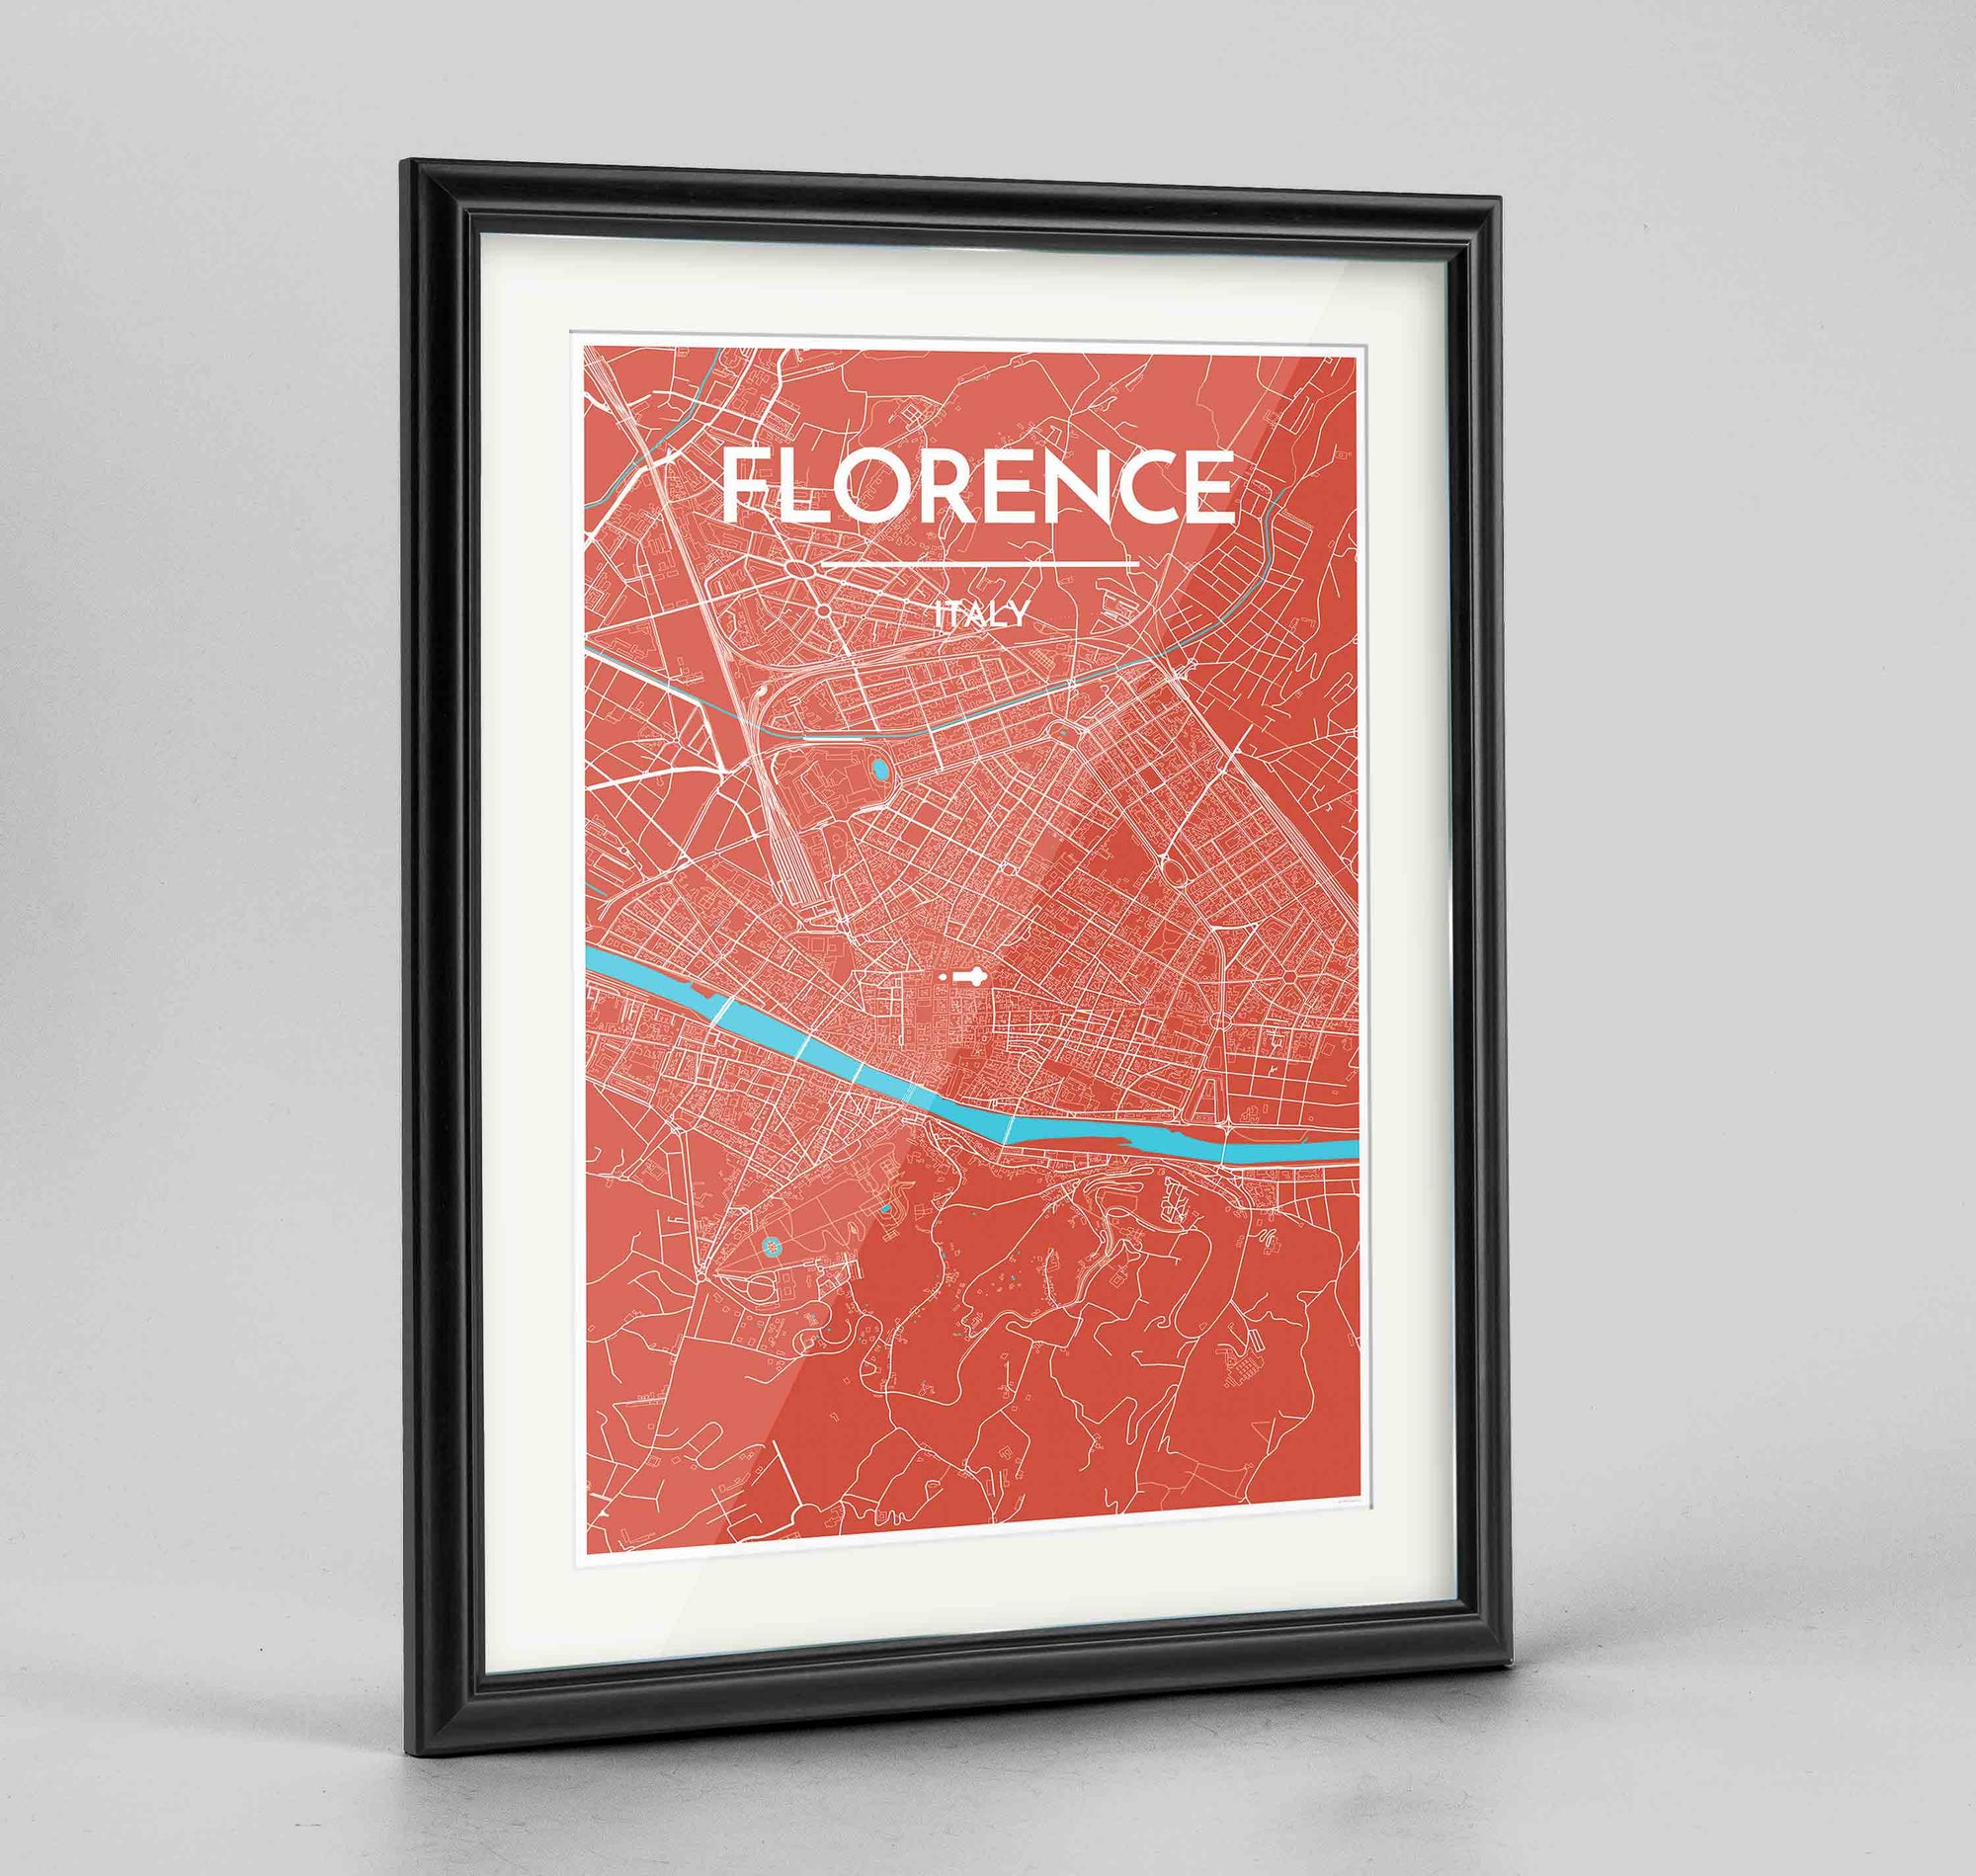 Framed Florence Map Art Print 24x36" Traditional Black frame Point Two Design Group